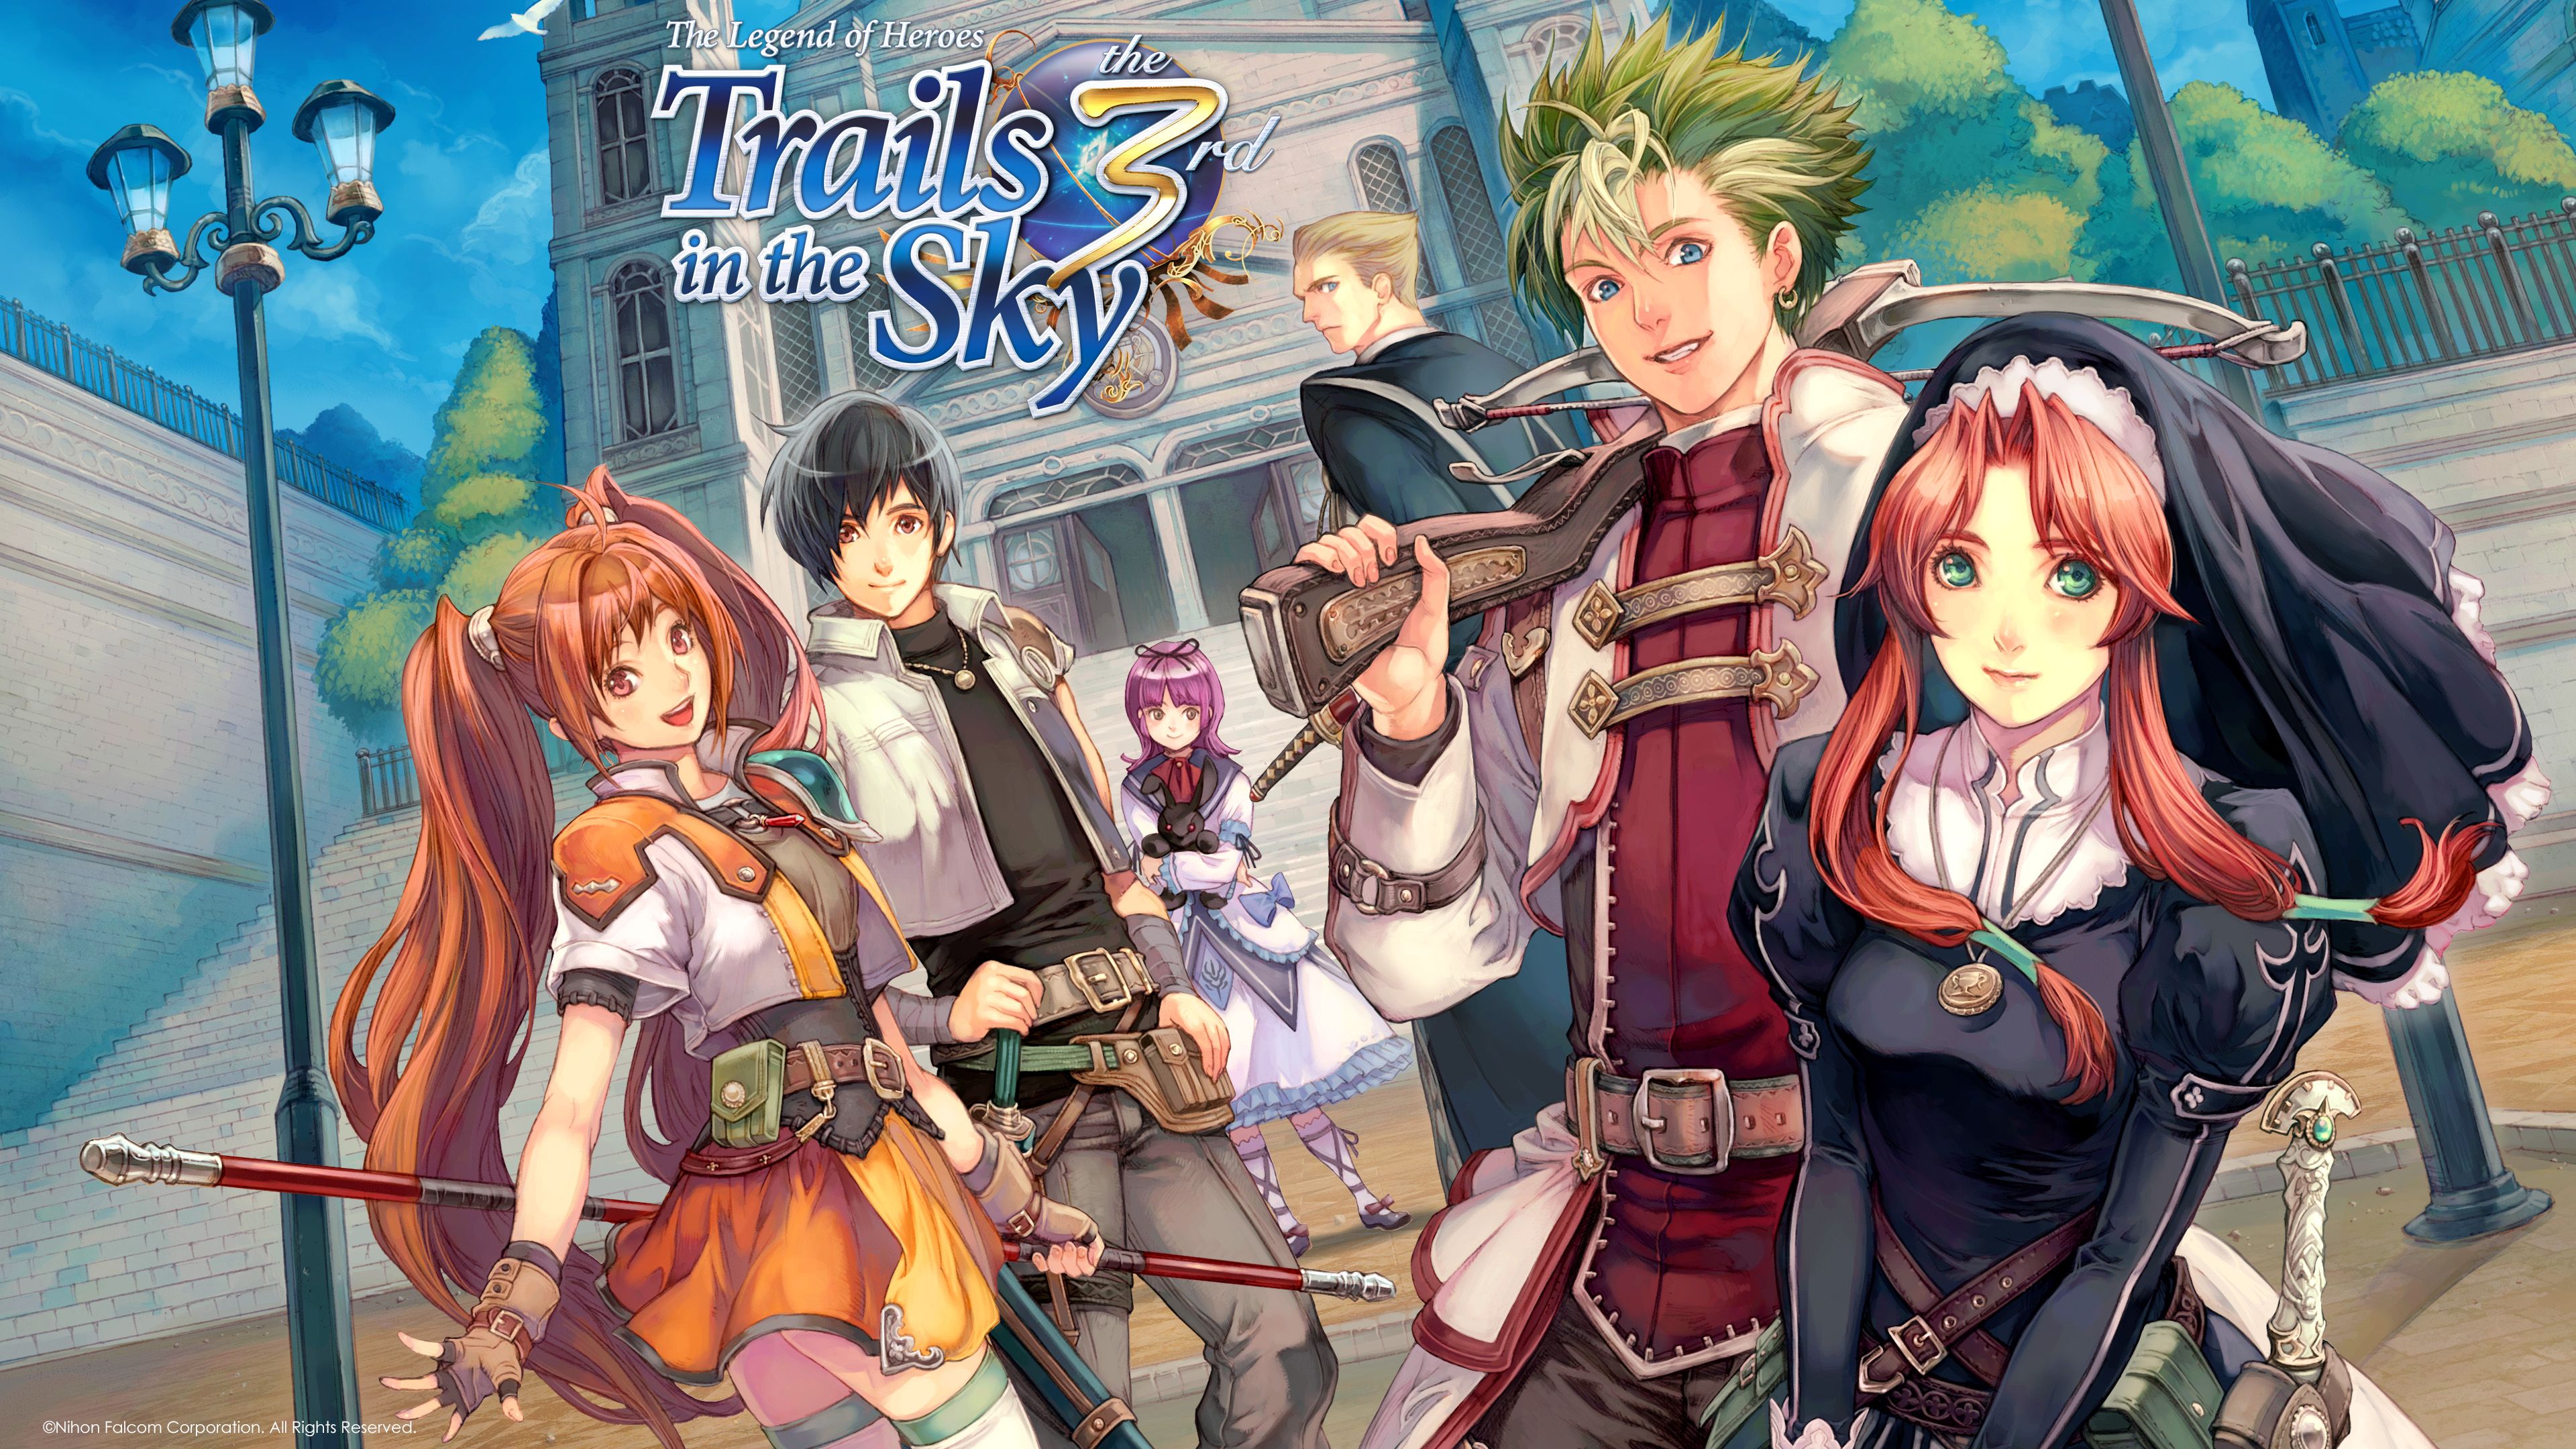 The Legend of Heroes Trails in the Sky the 3rd Wallpaper 022. Wallpaper Ethereal Games